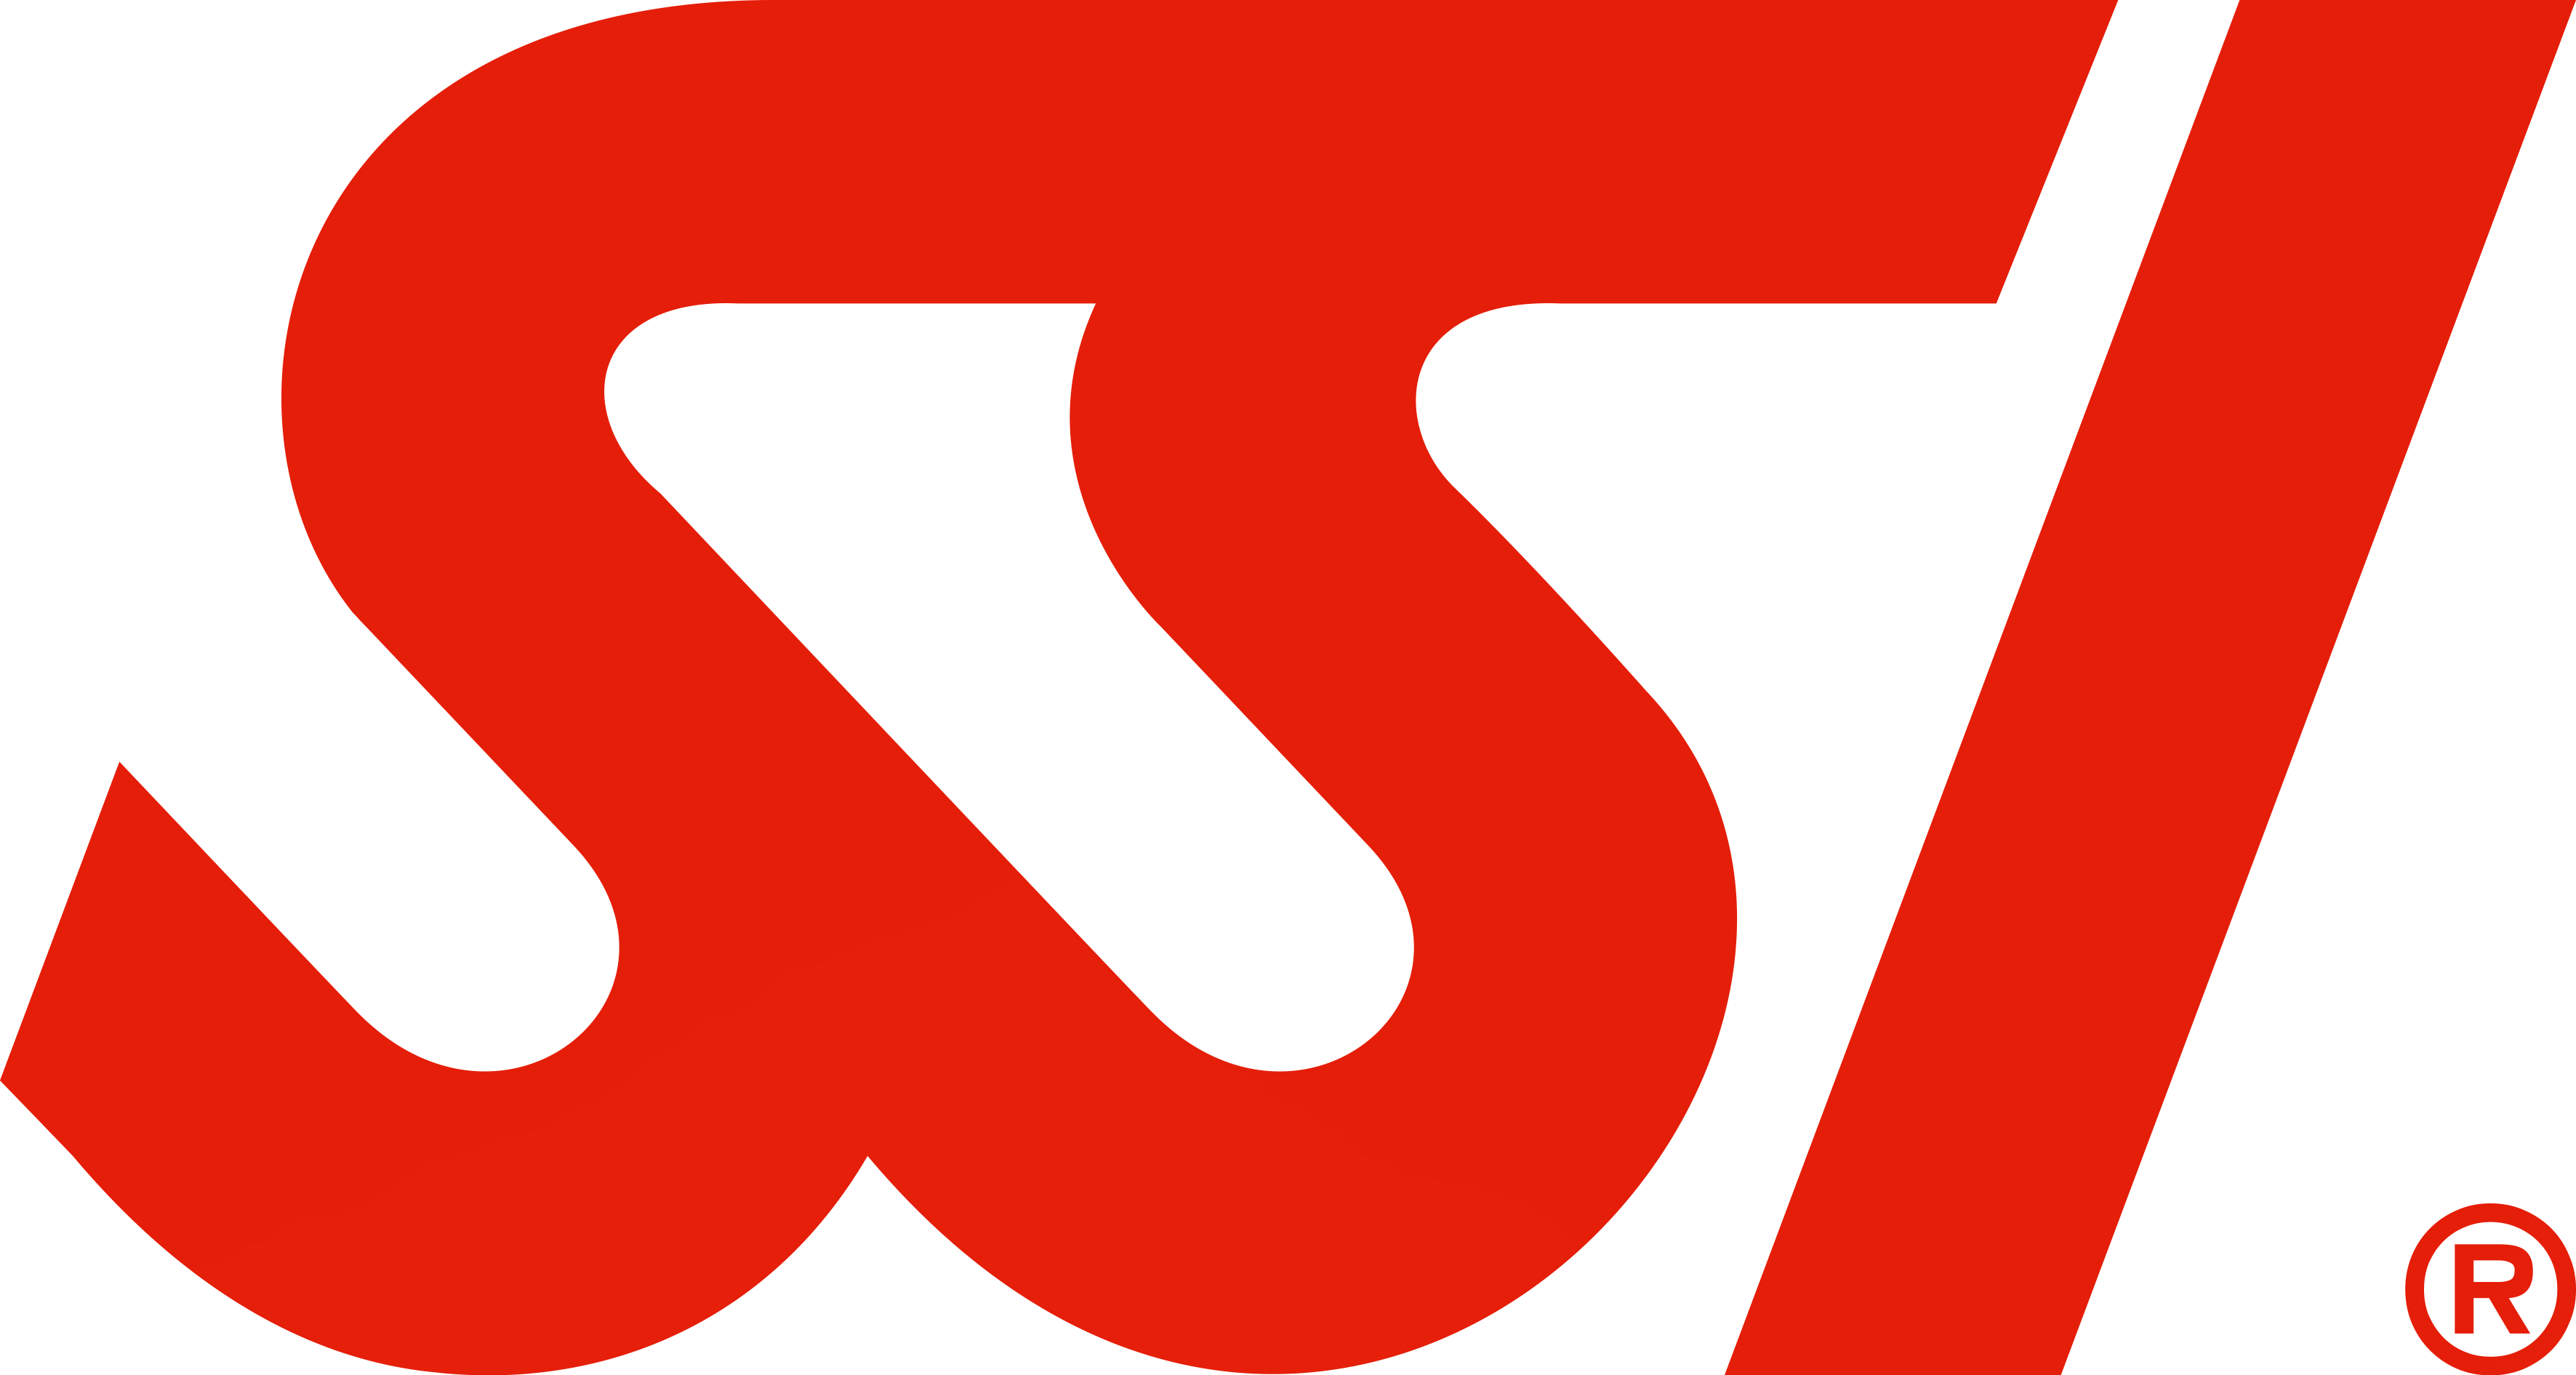 SSI_LOGO_Red.png  